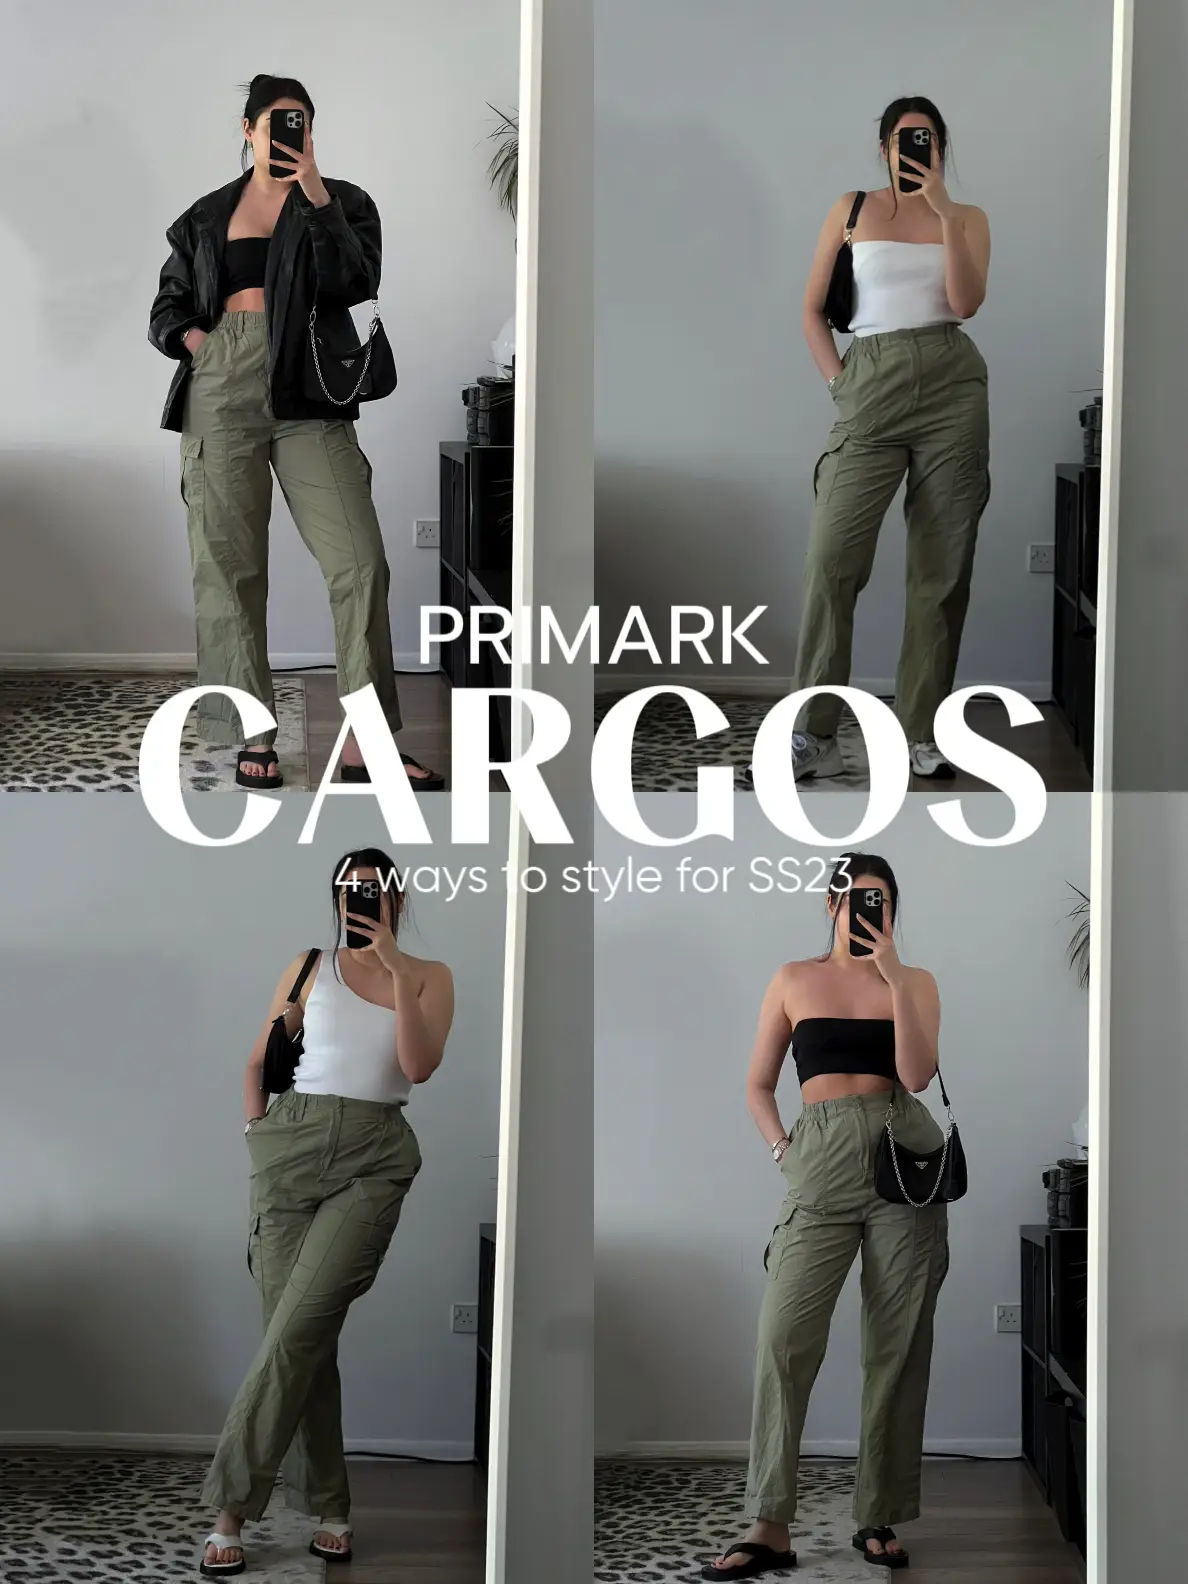 3 ways to style Cargo Pants, Gallery posted by Alanasunny